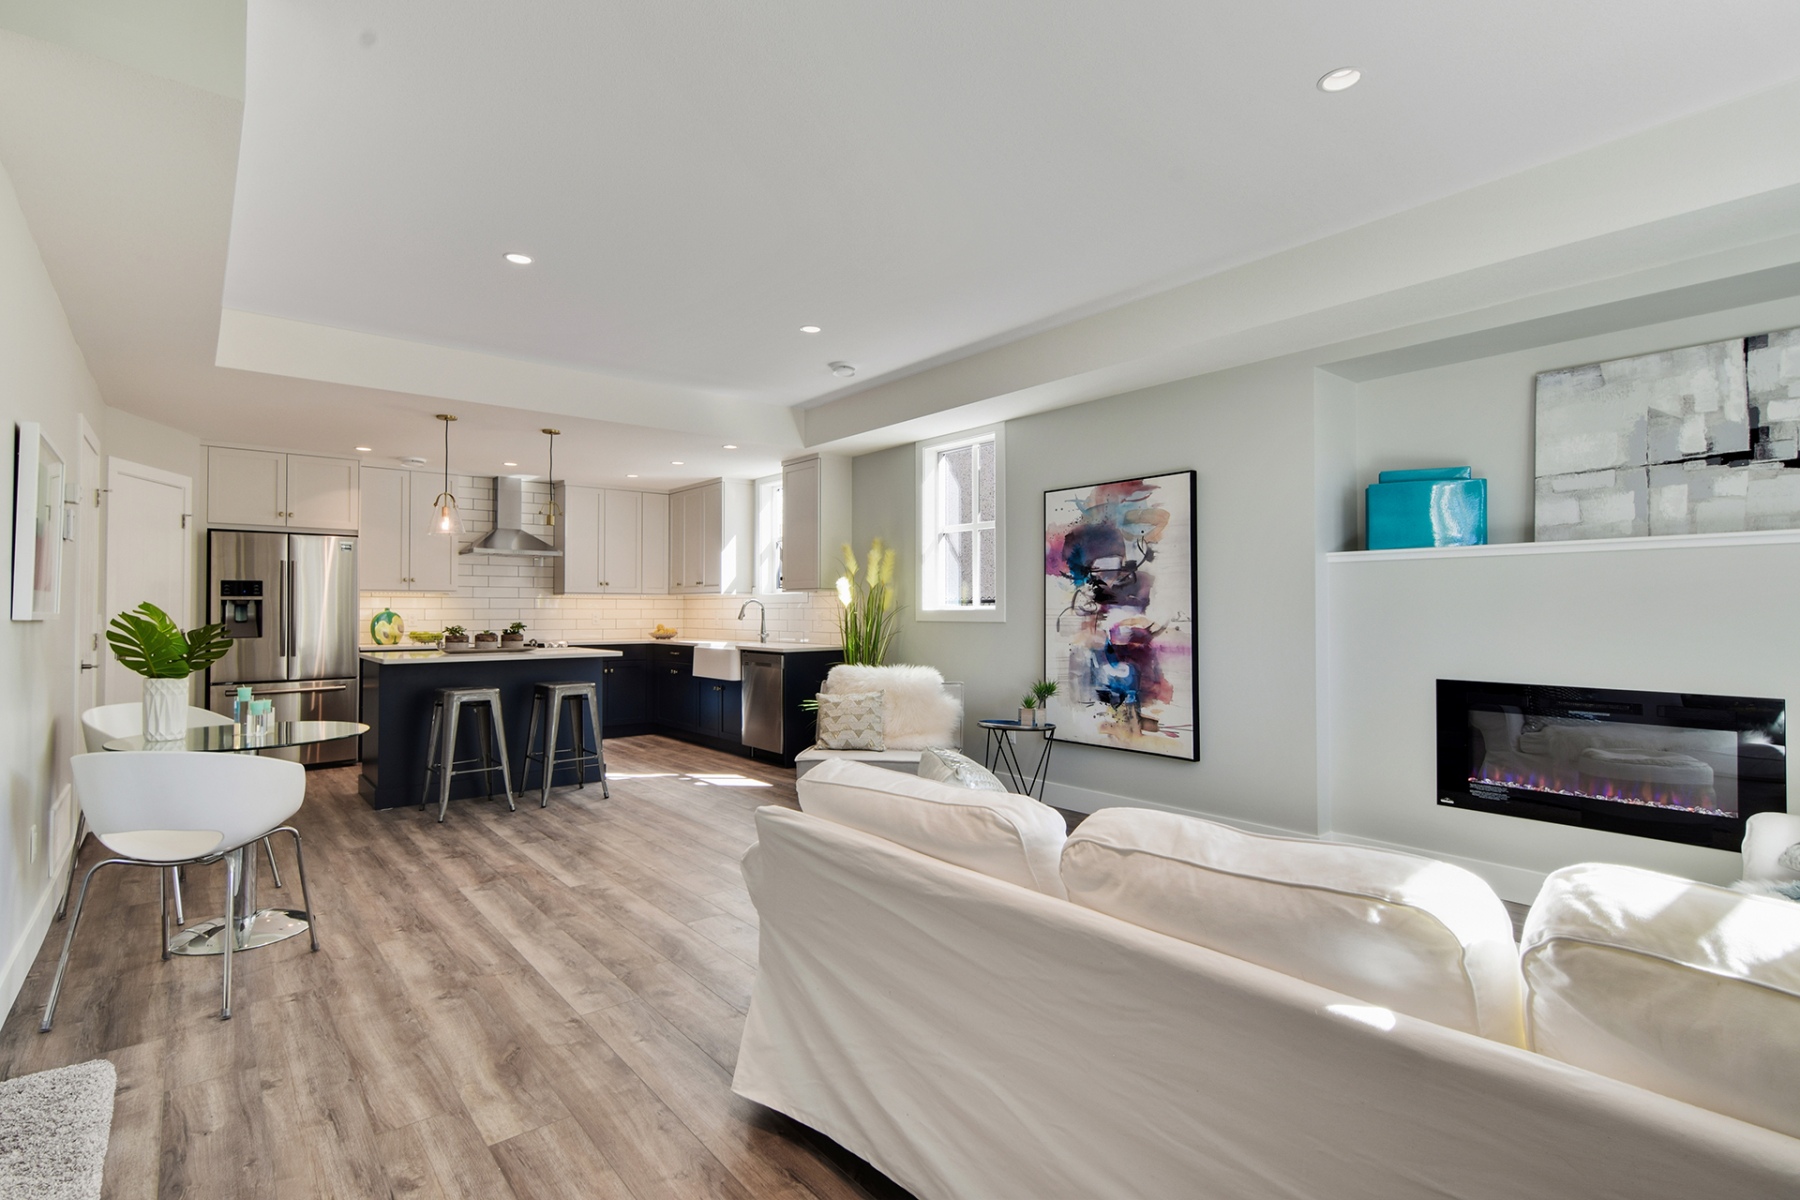 1_harmony_homes_glenwood_infill_project_house_interior_gallery_image_6